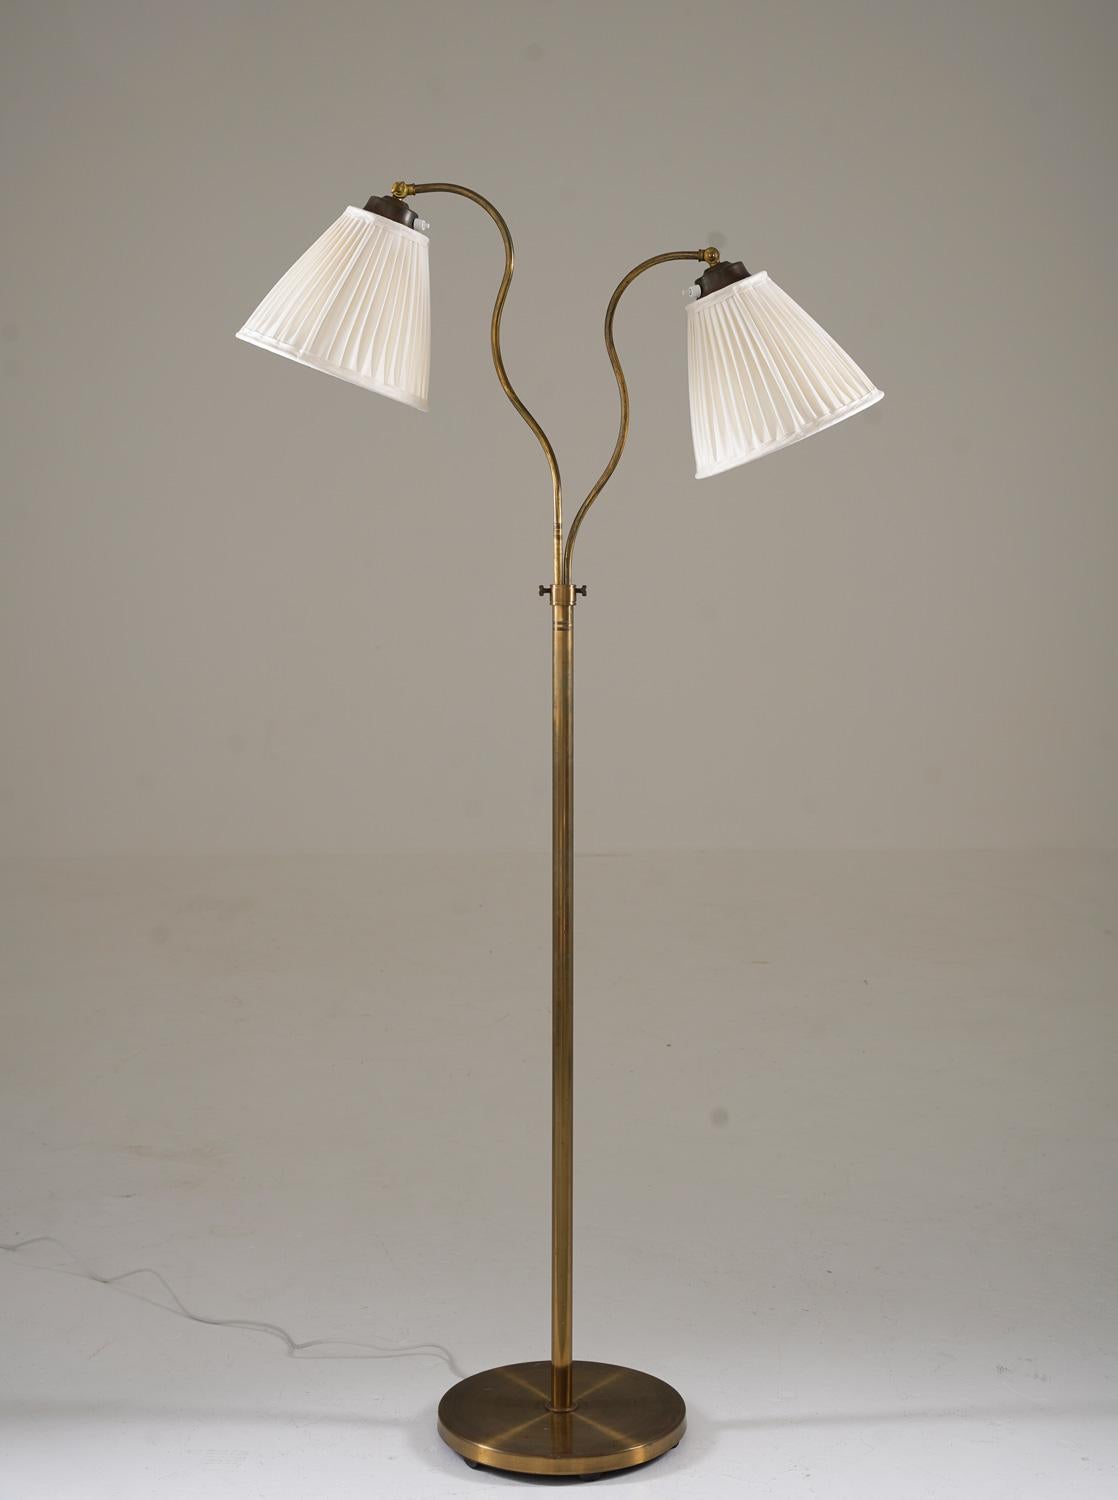 This is a lovely Swedish Modern floor lamp that was manufactured in Sweden during the 1940s by Corona.
The lamp features a brass covered iron base and a brass rod, which supports two swivel arms that hold the shades. The swivel arms are adjustable